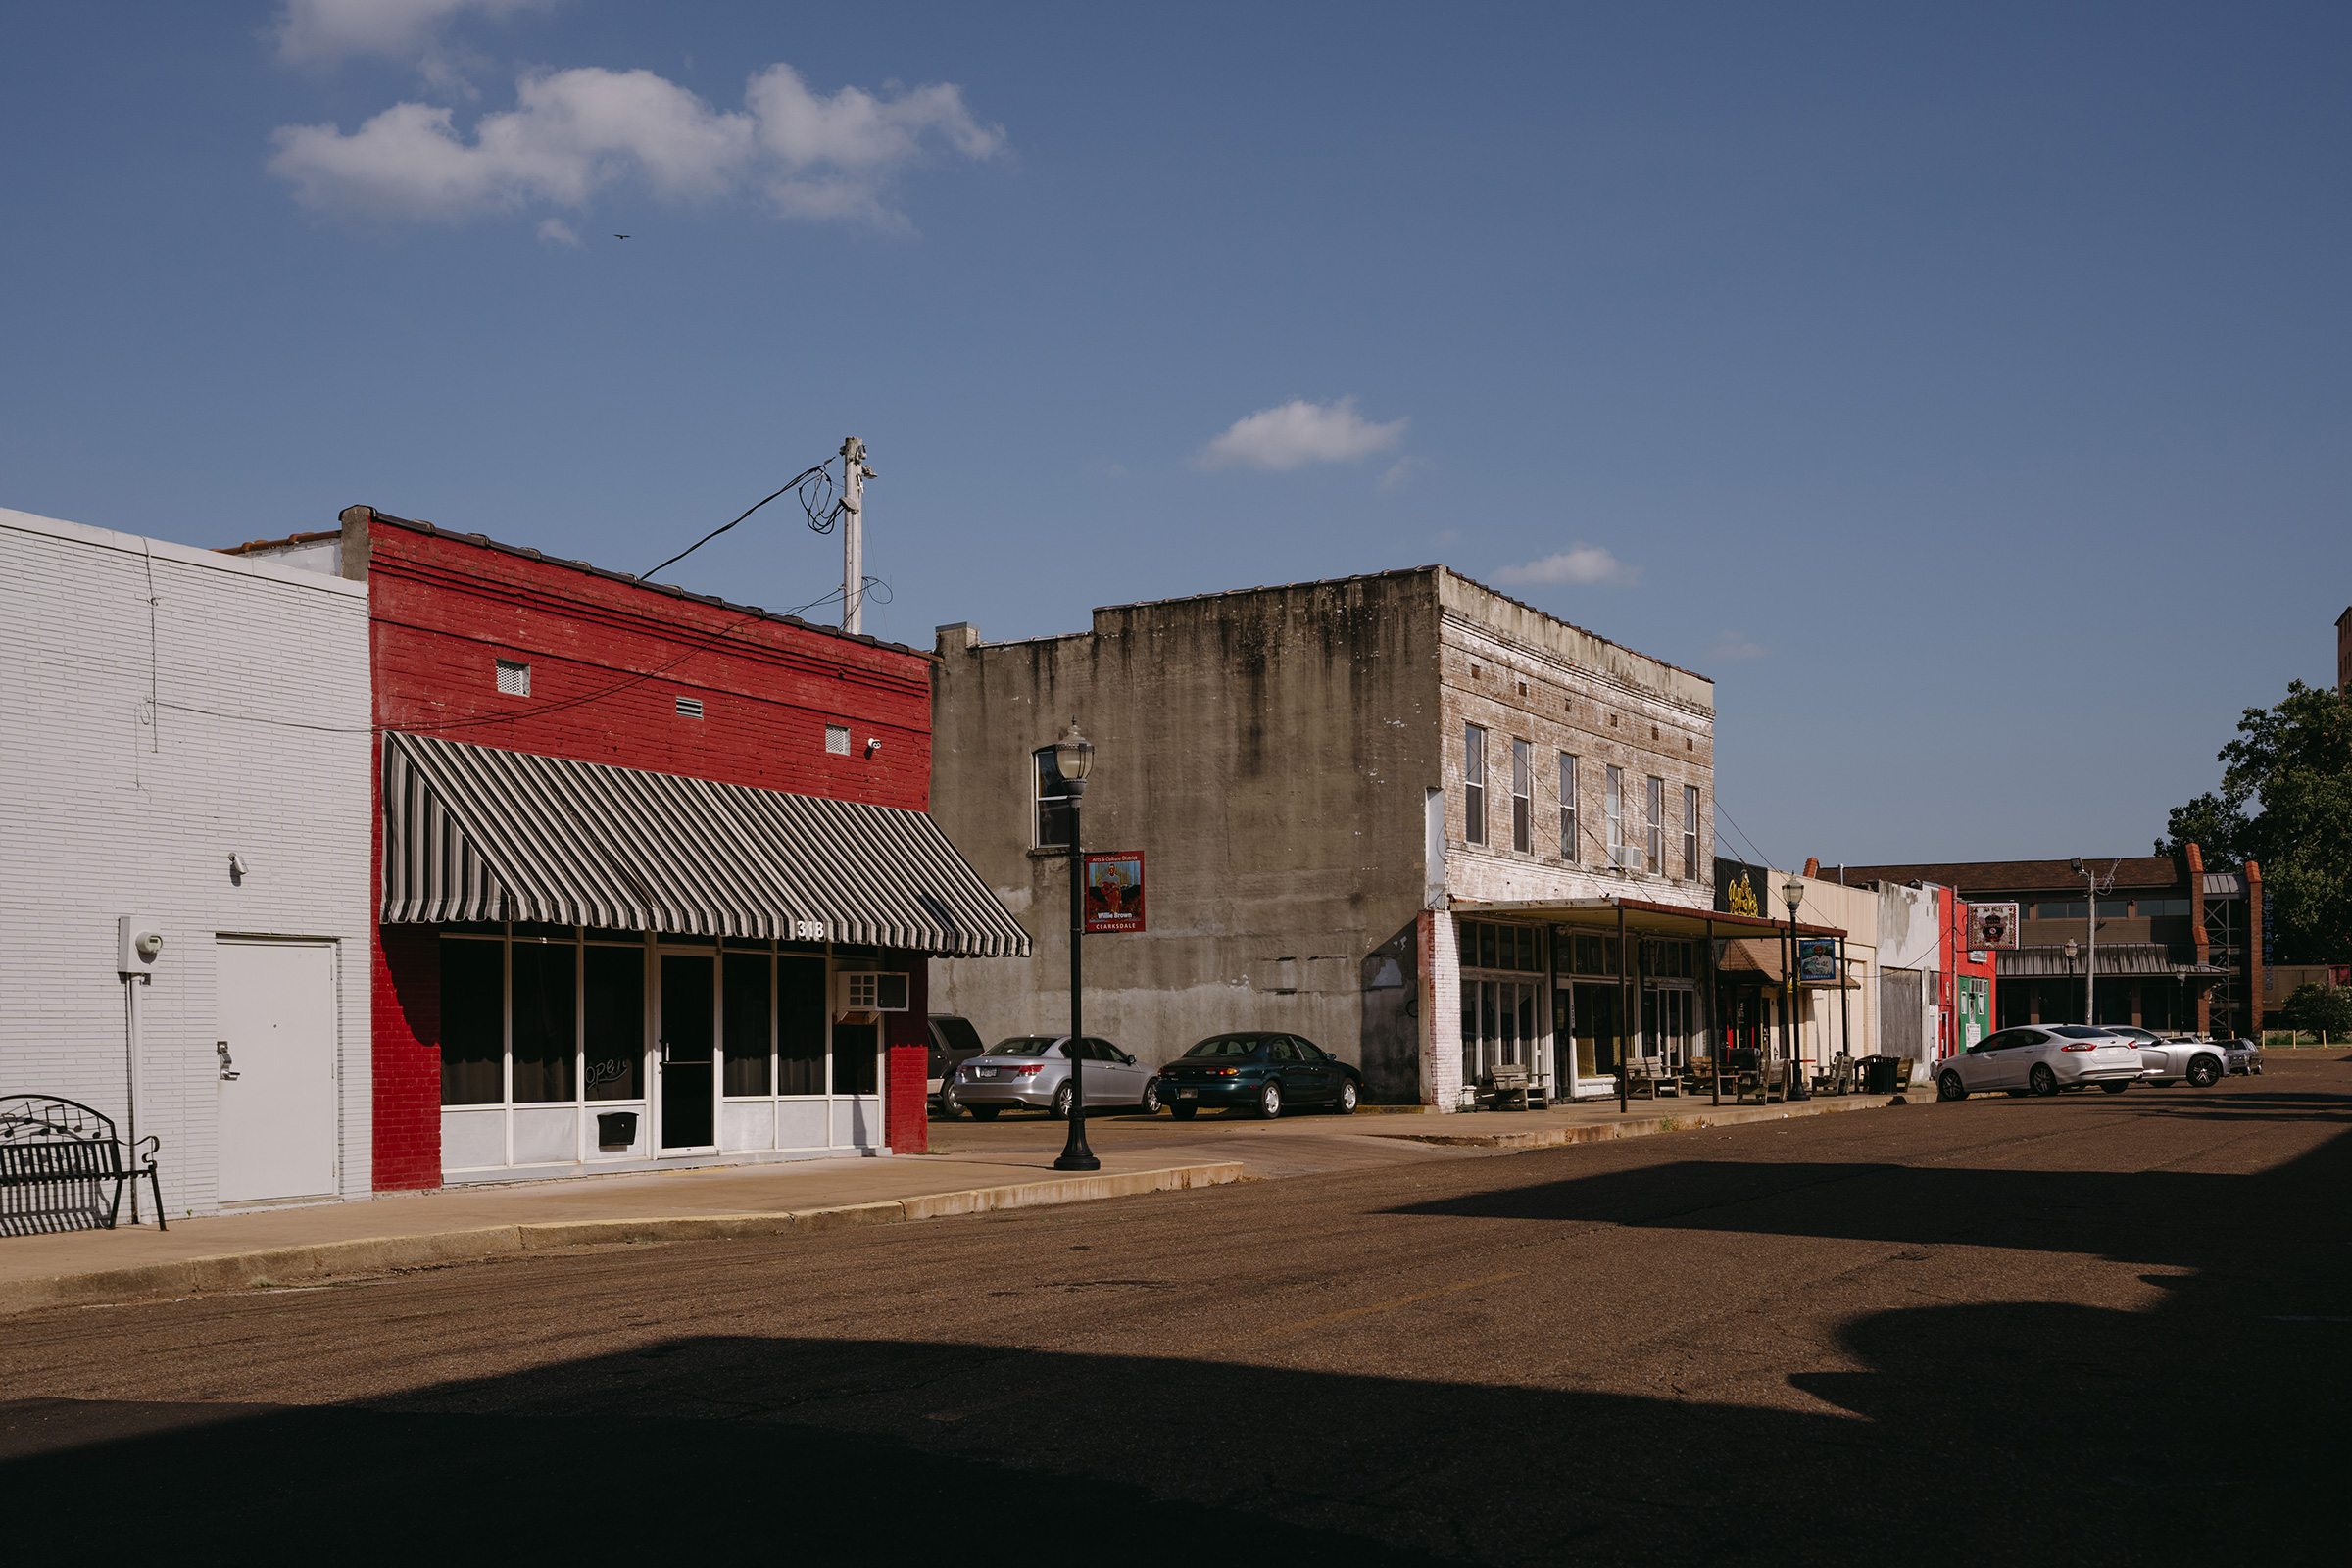 Clarksdale, Miss. (Lucy Garrett for TIME)